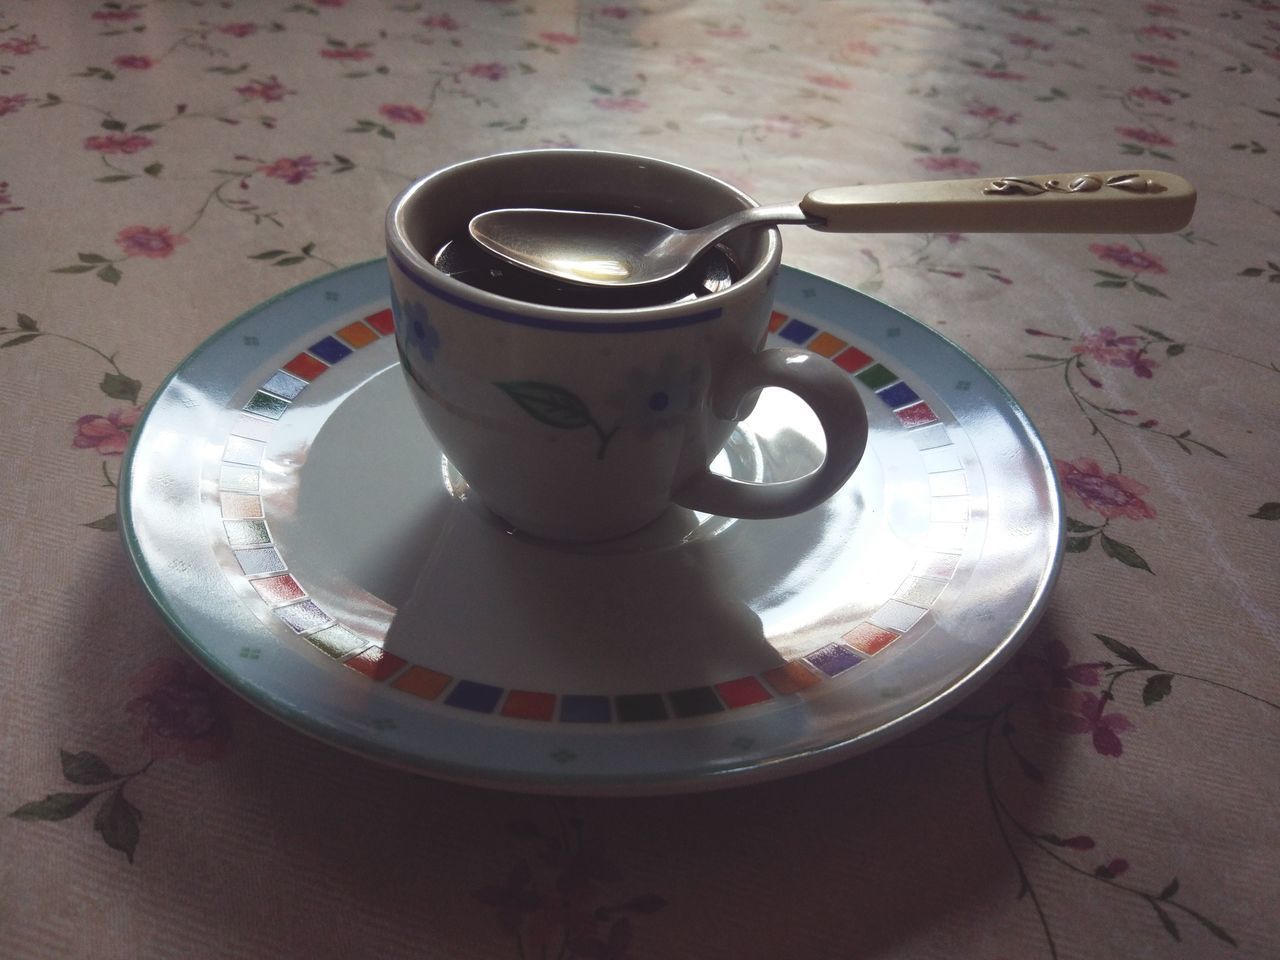 HIGH ANGLE VIEW OF COFFEE ON TABLE IN PLATE